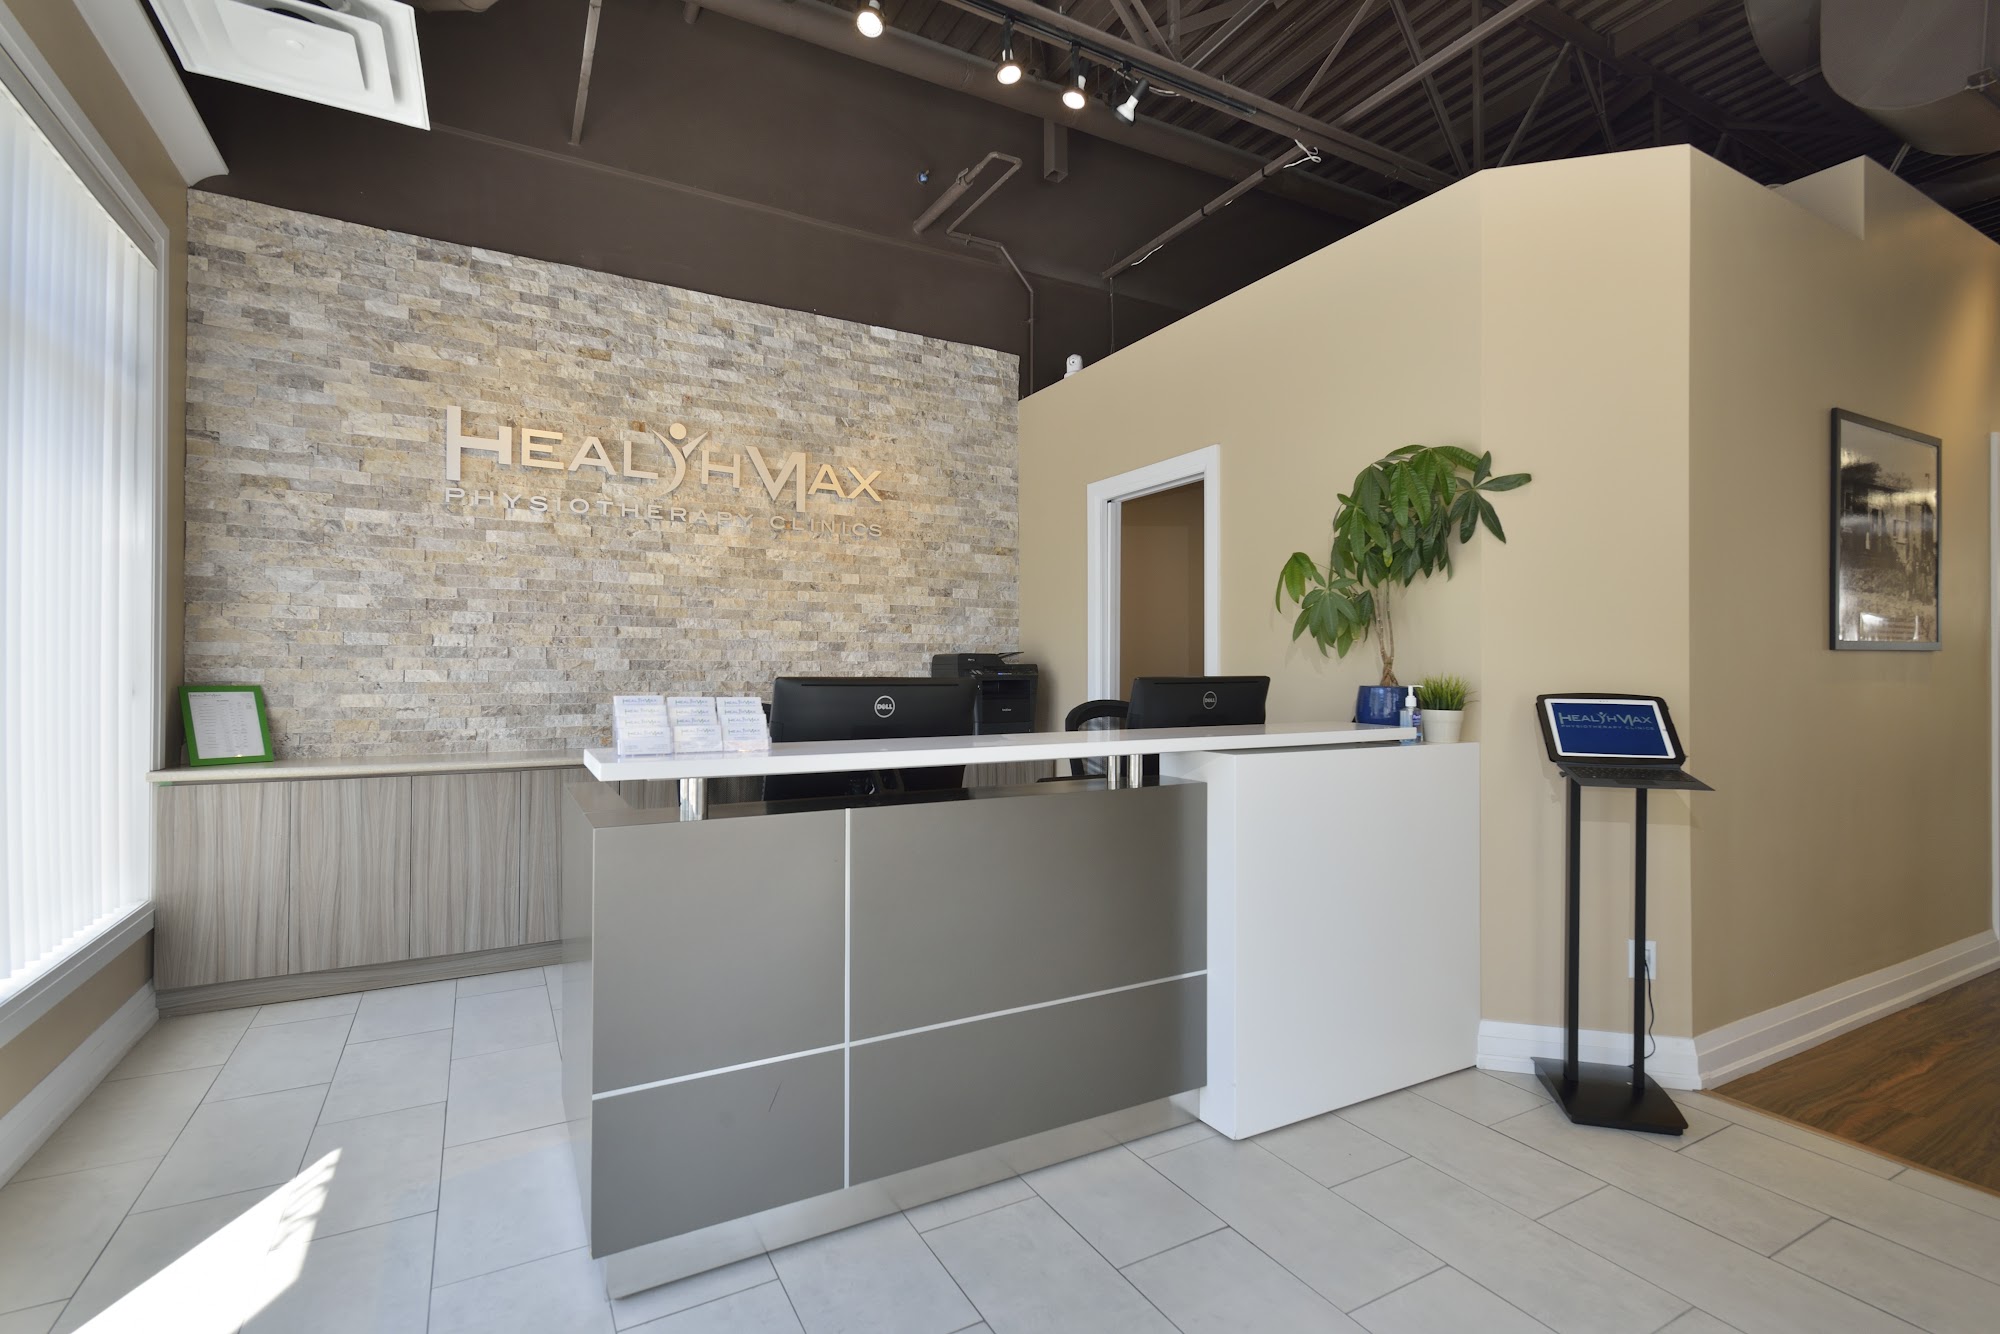 HealthMax Physiotherapy - Scarborough